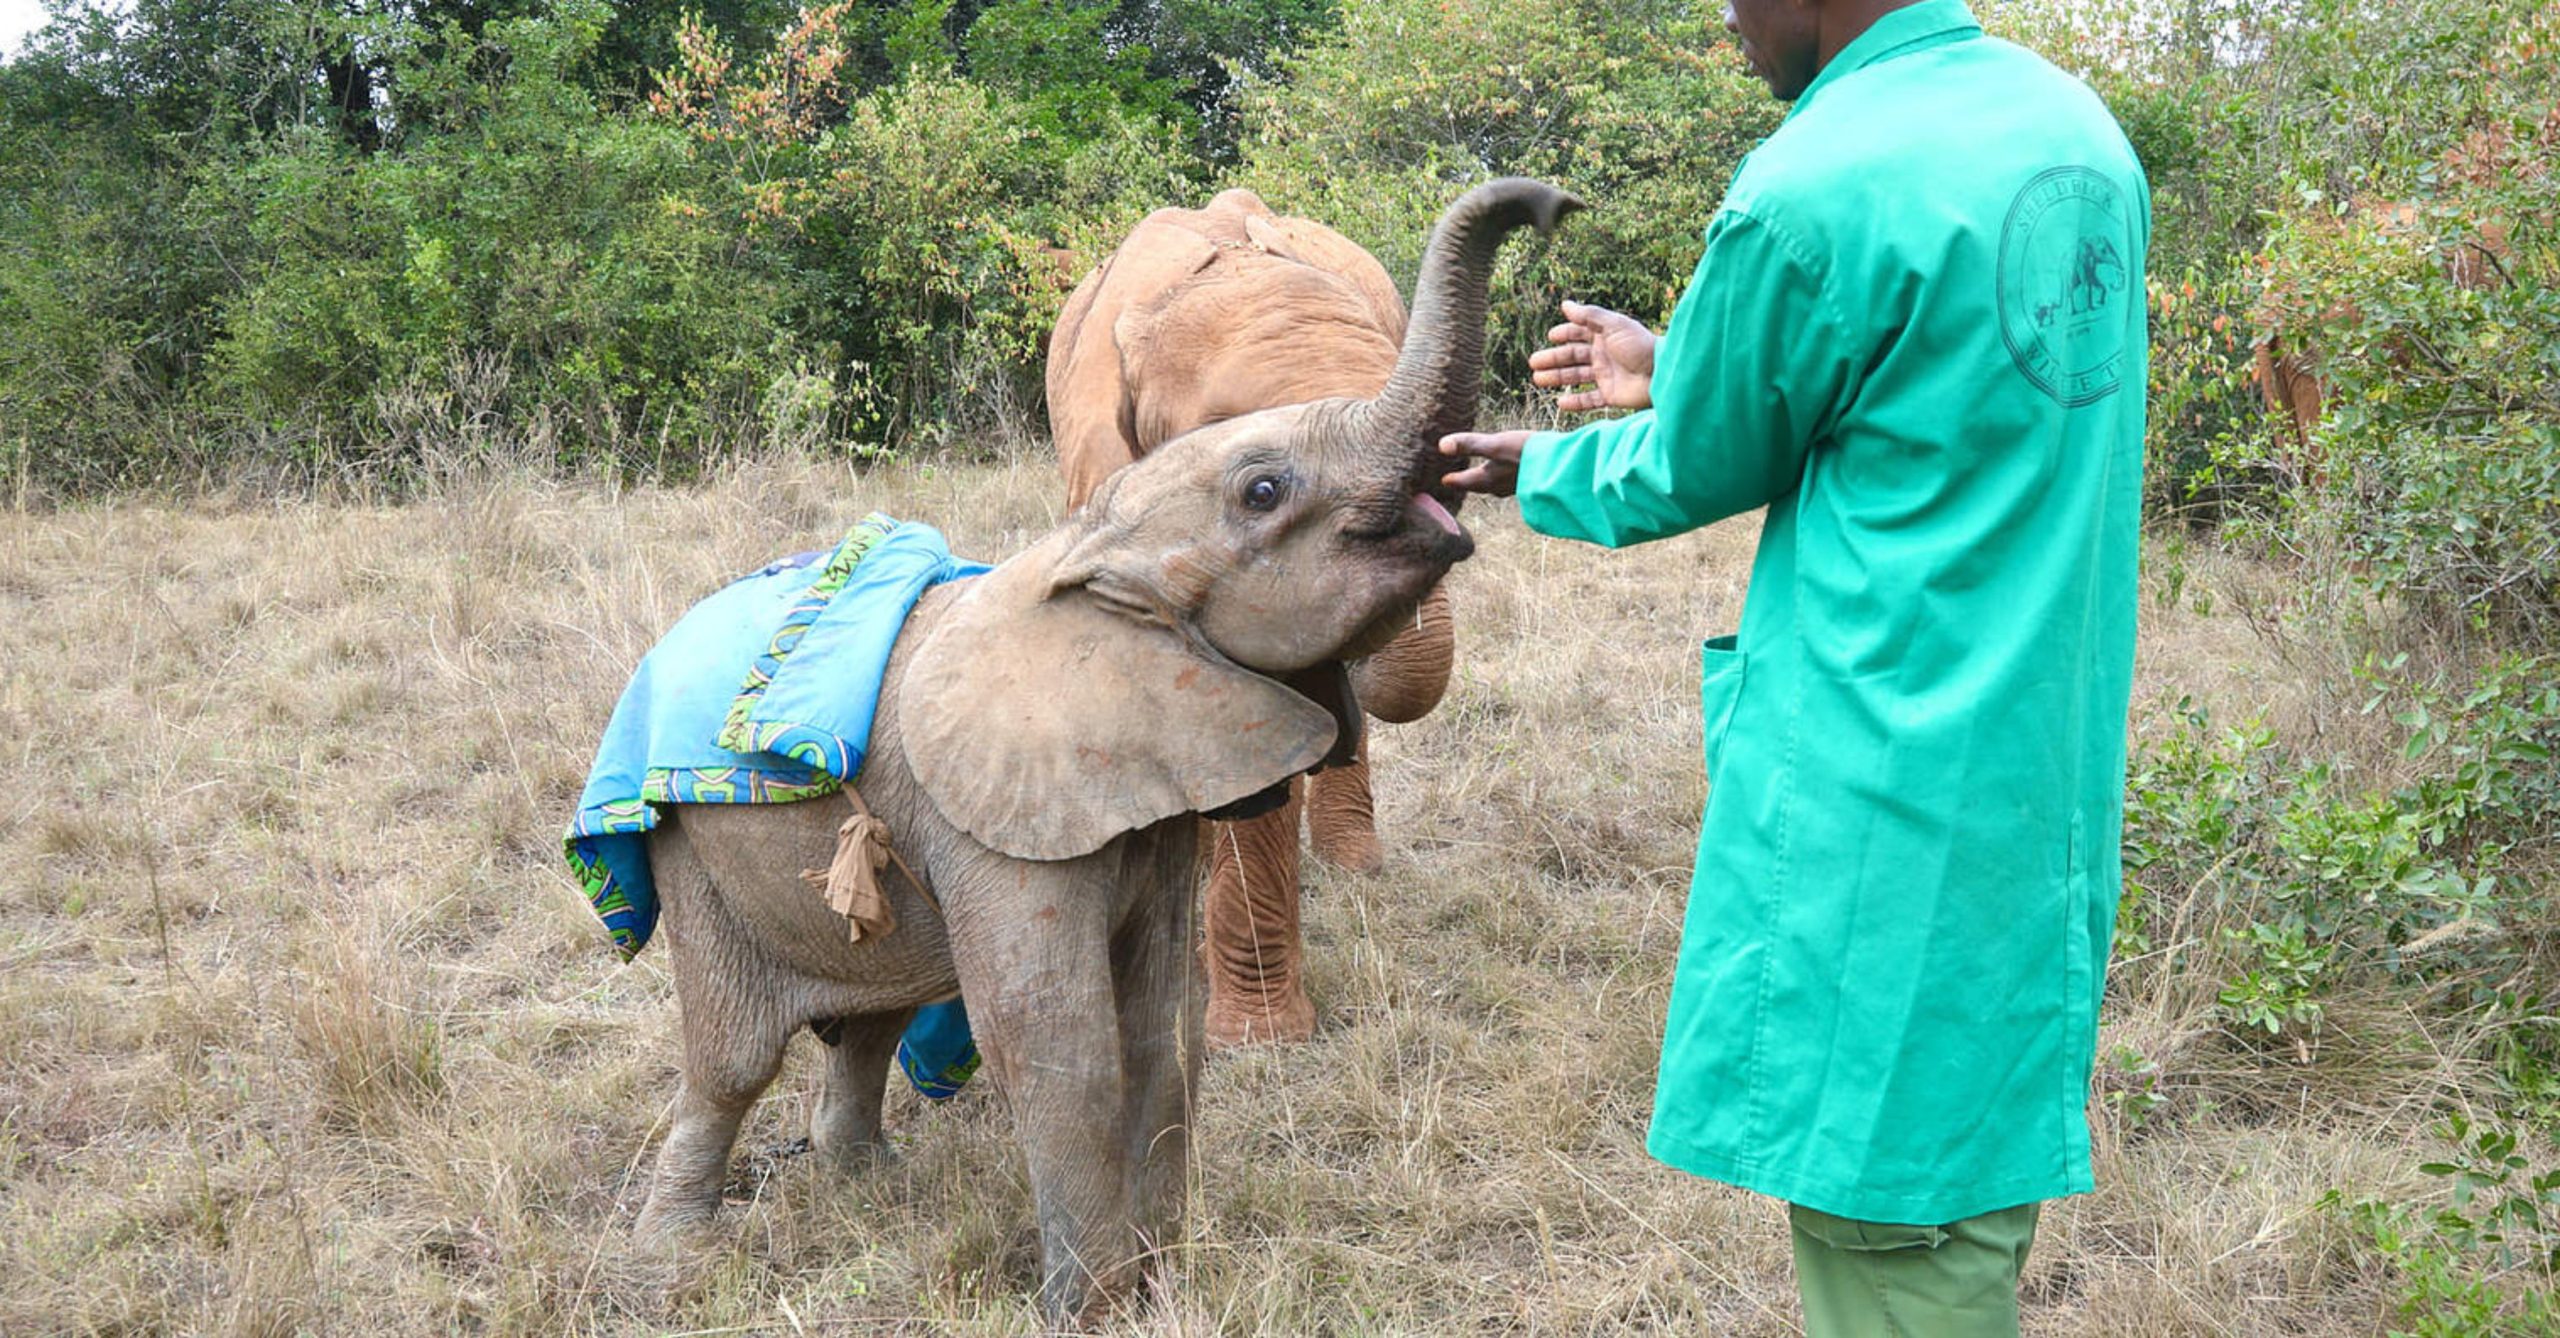 The orphan elephant’s journey to overcome strange things in the Savanna to continue living a normal life